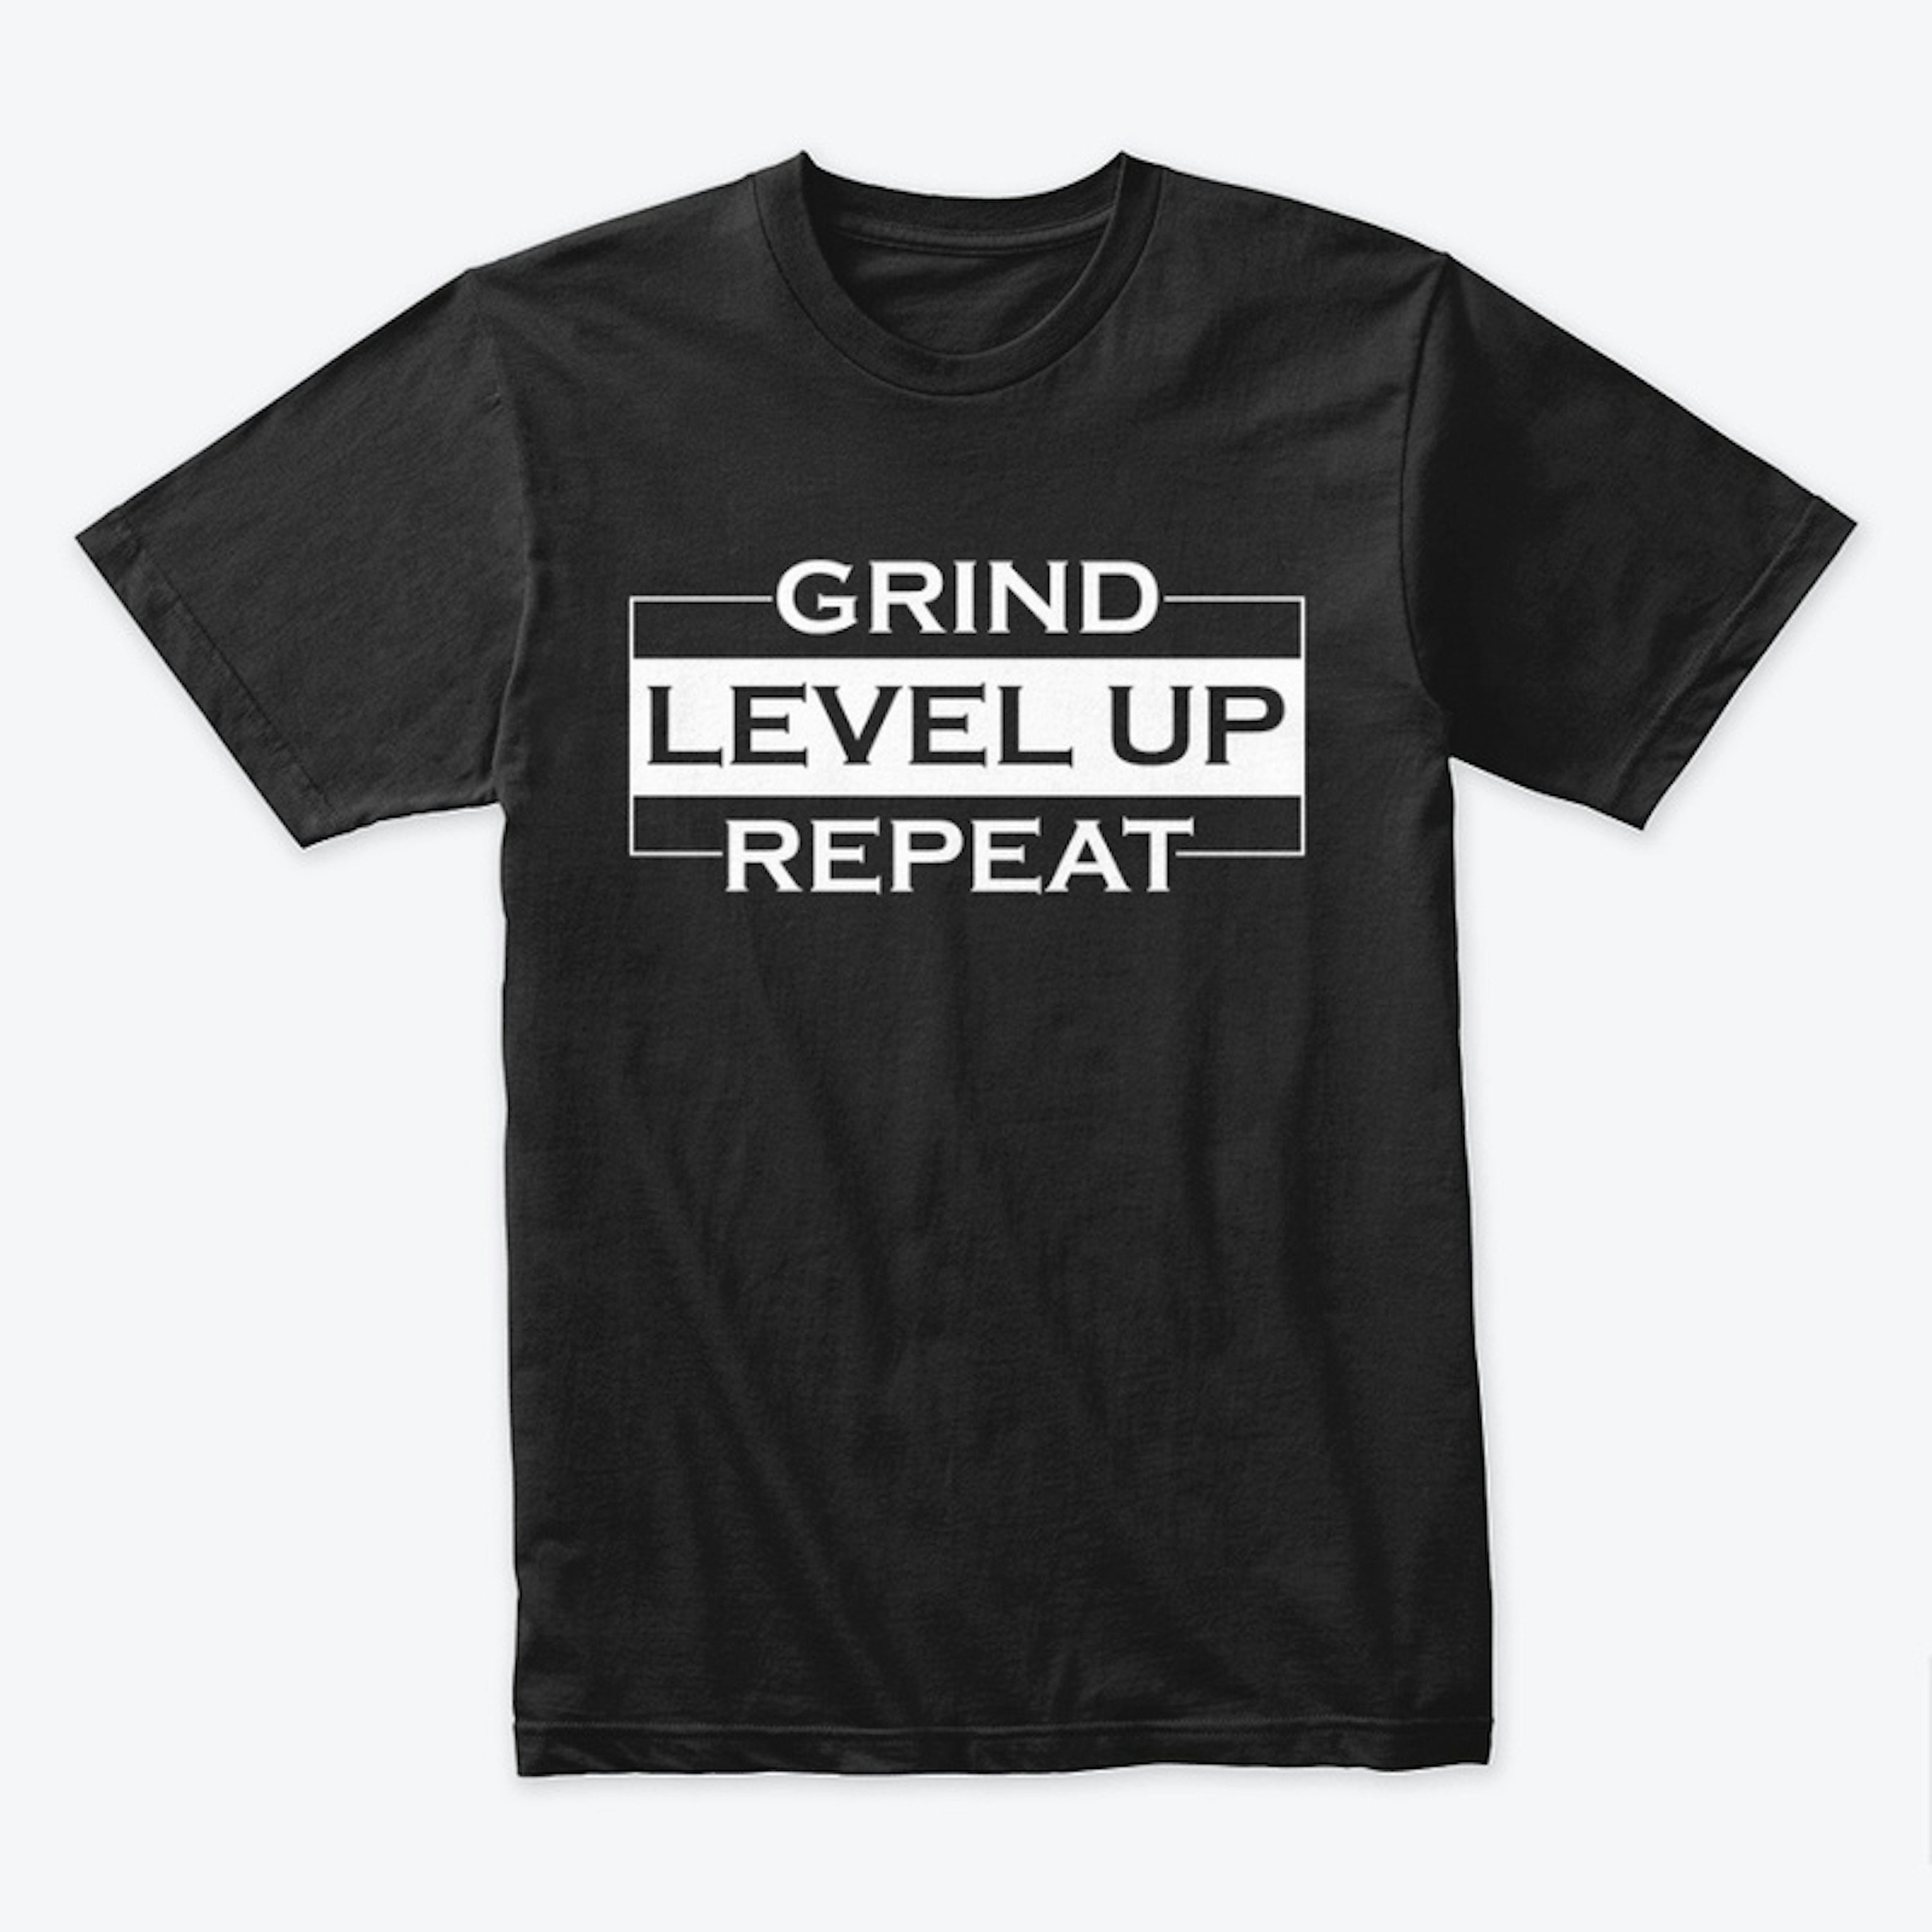 Grind - Level Up - Repeat (White Print)